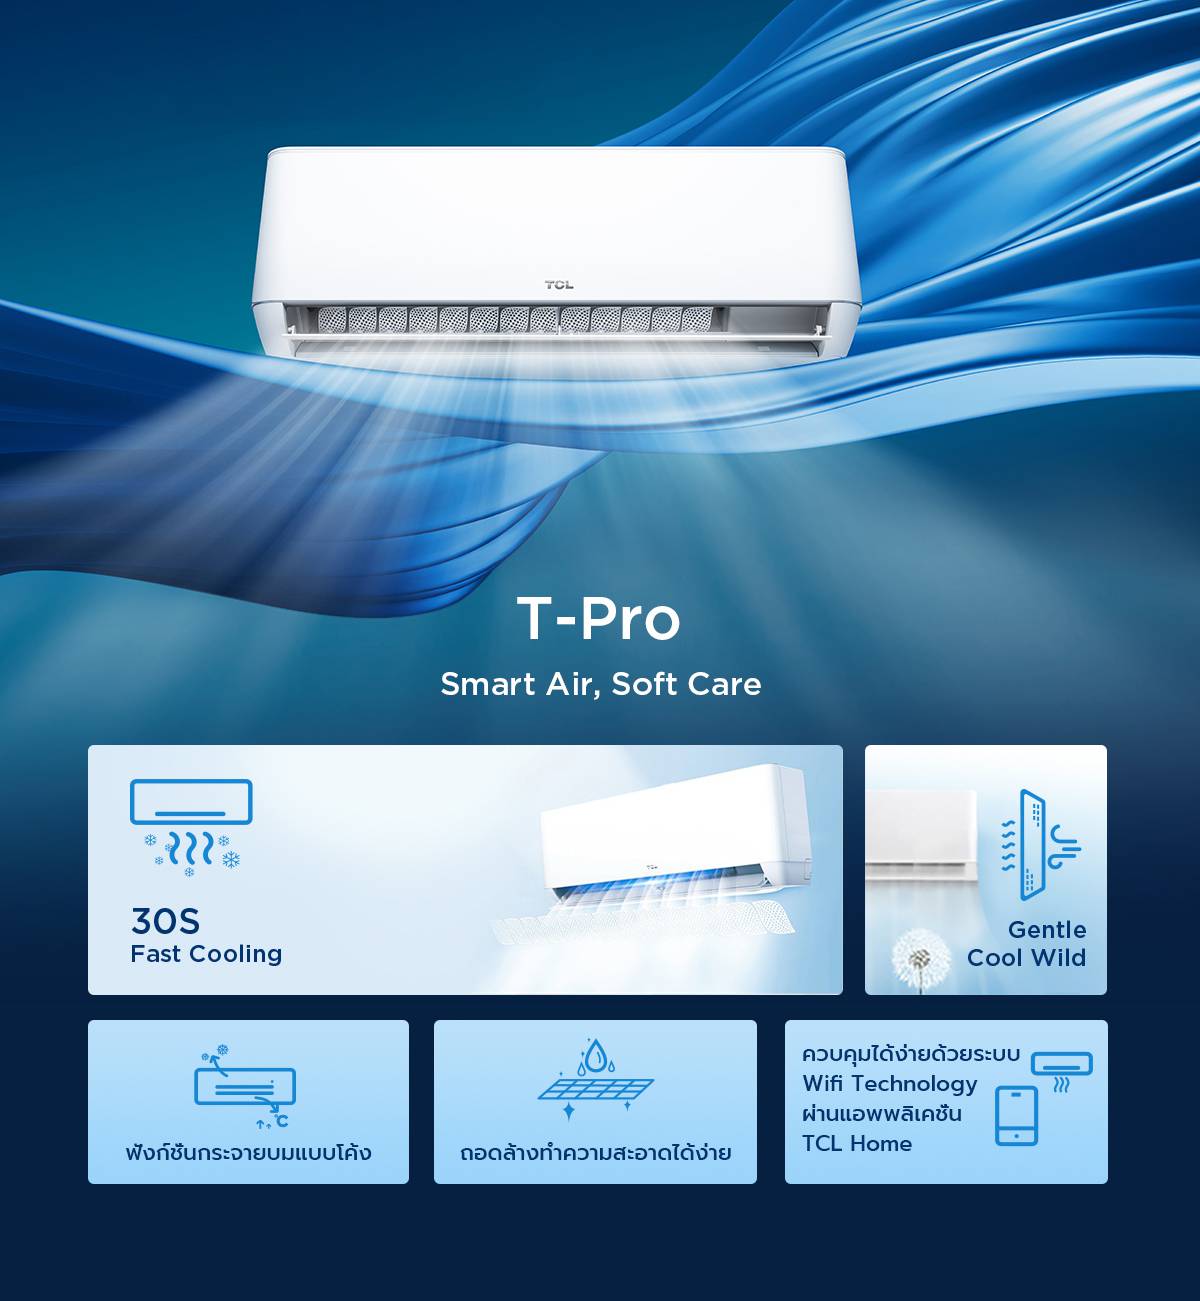 TCL T-Pro AC features